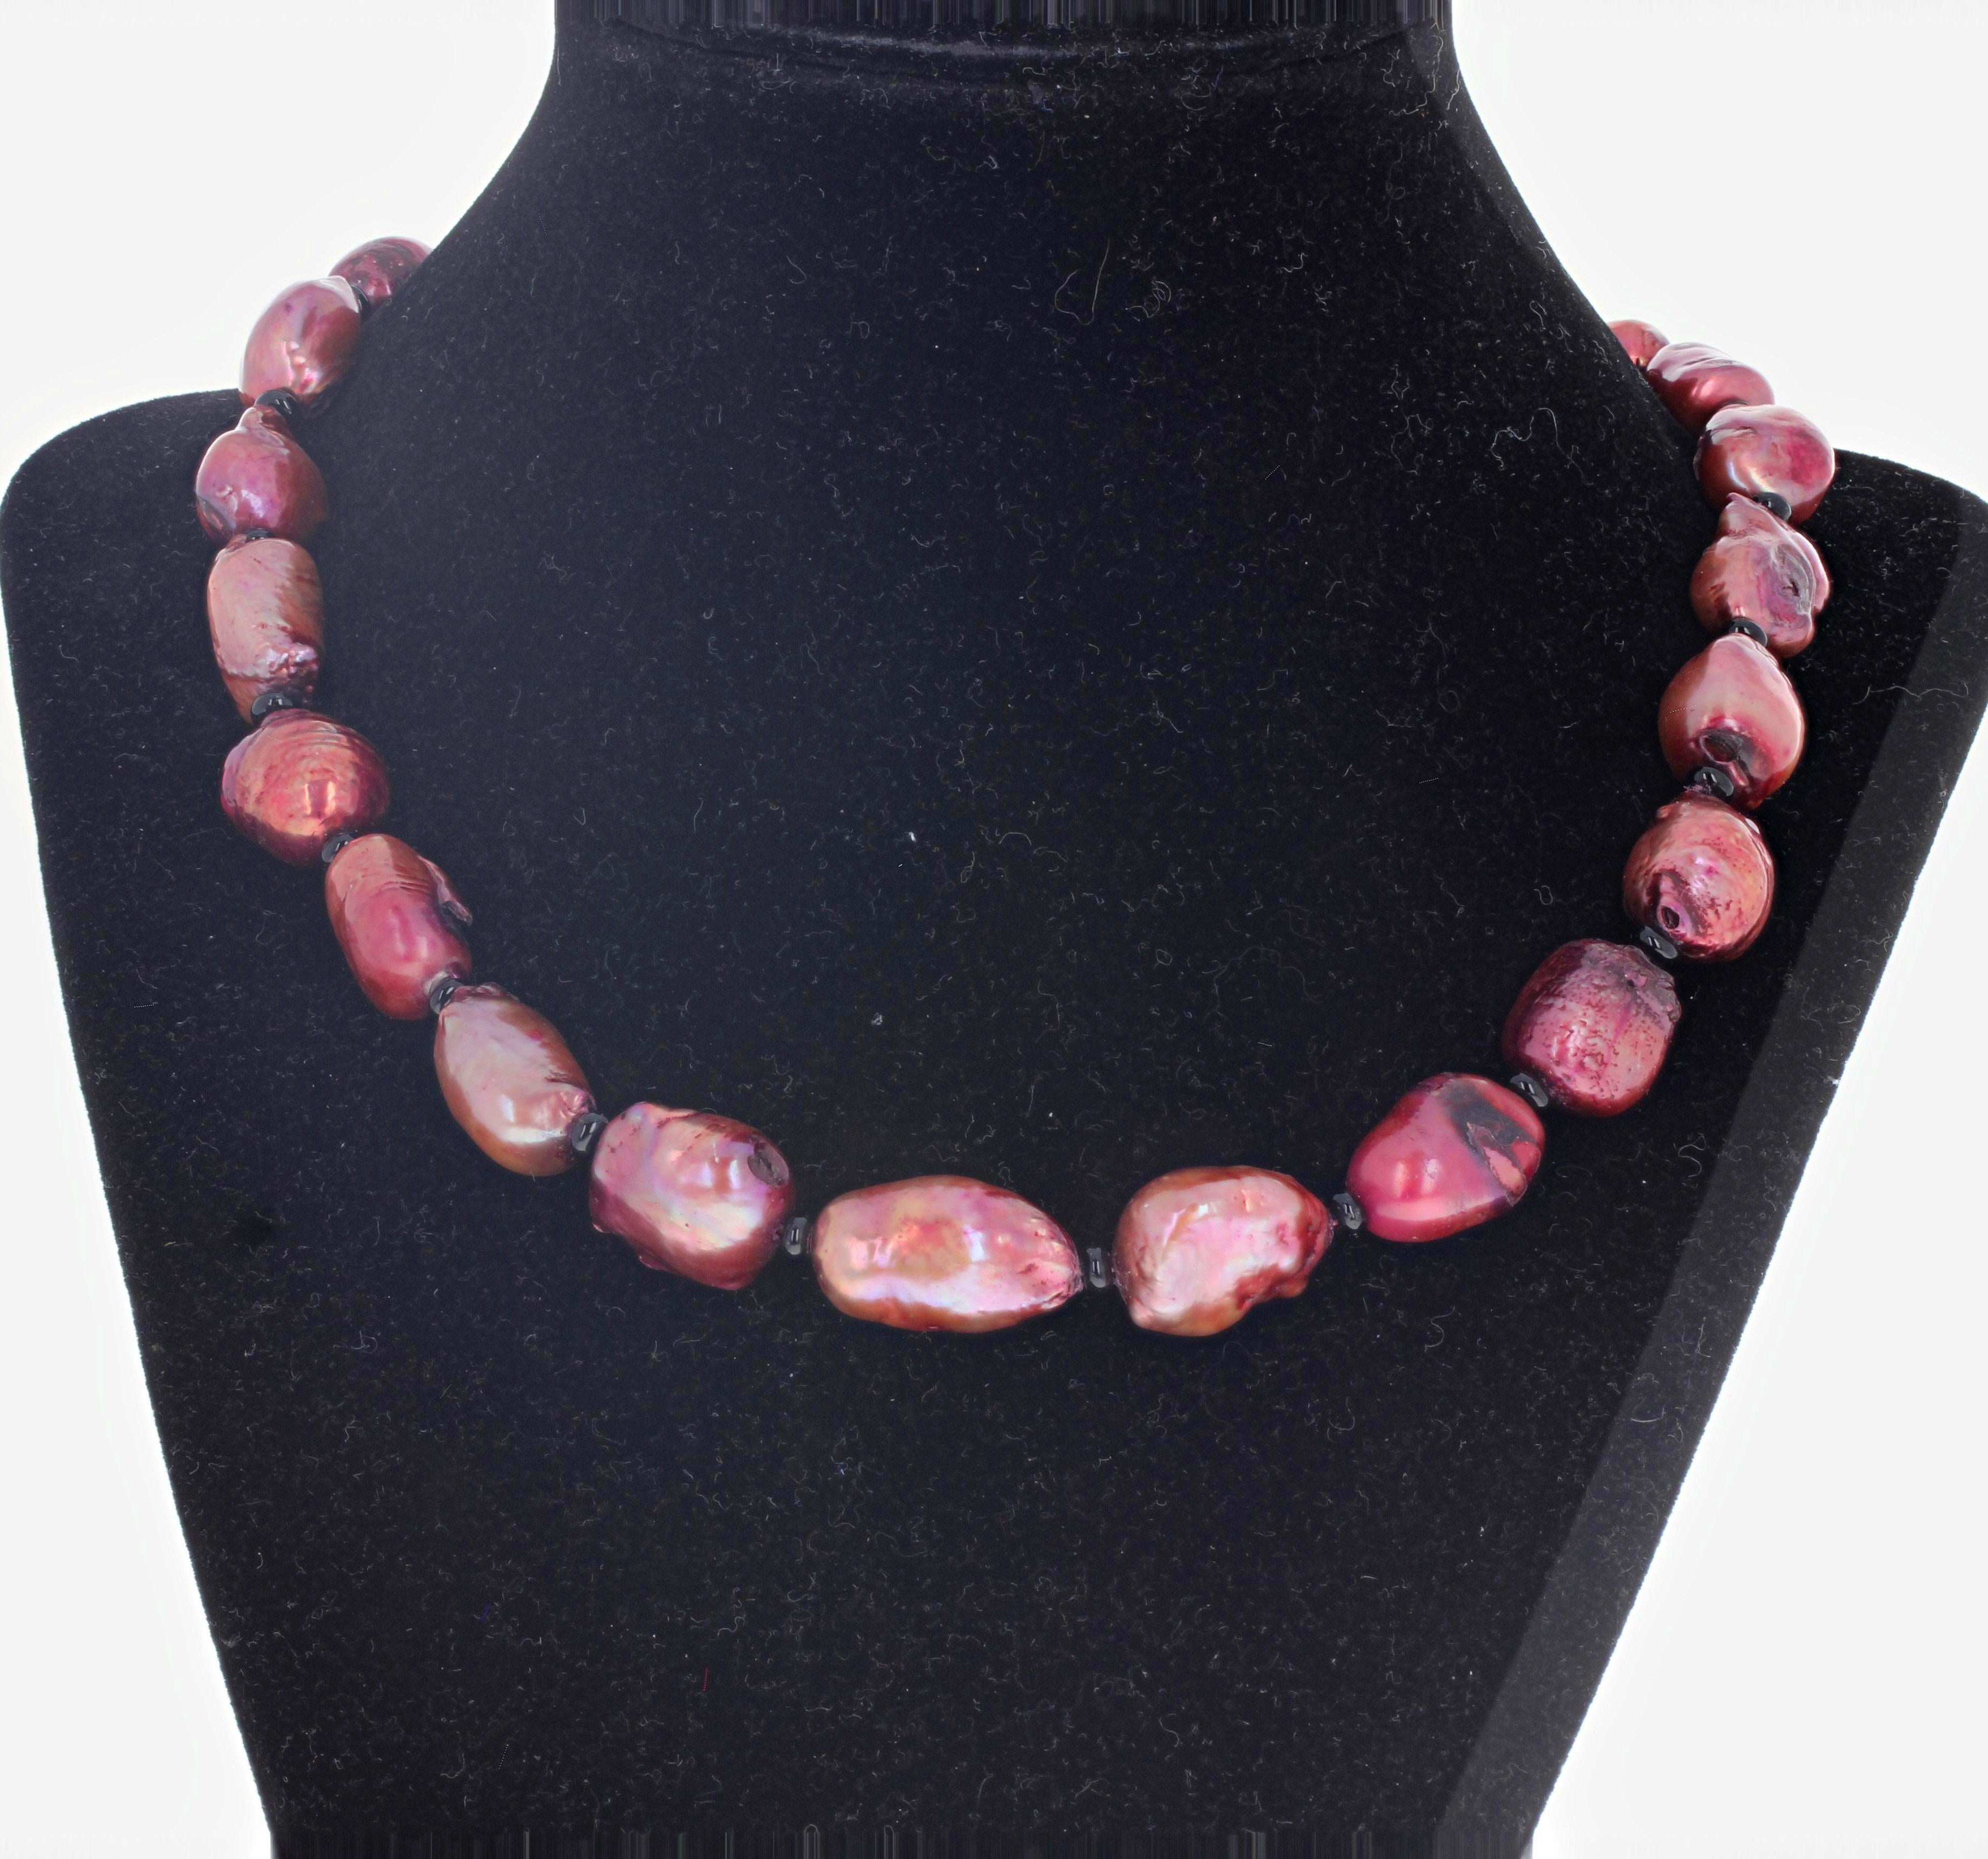 Women's or Men's AJD Very Rare Glowing Coppery Pink Cultured Pearl Necklace For Sale